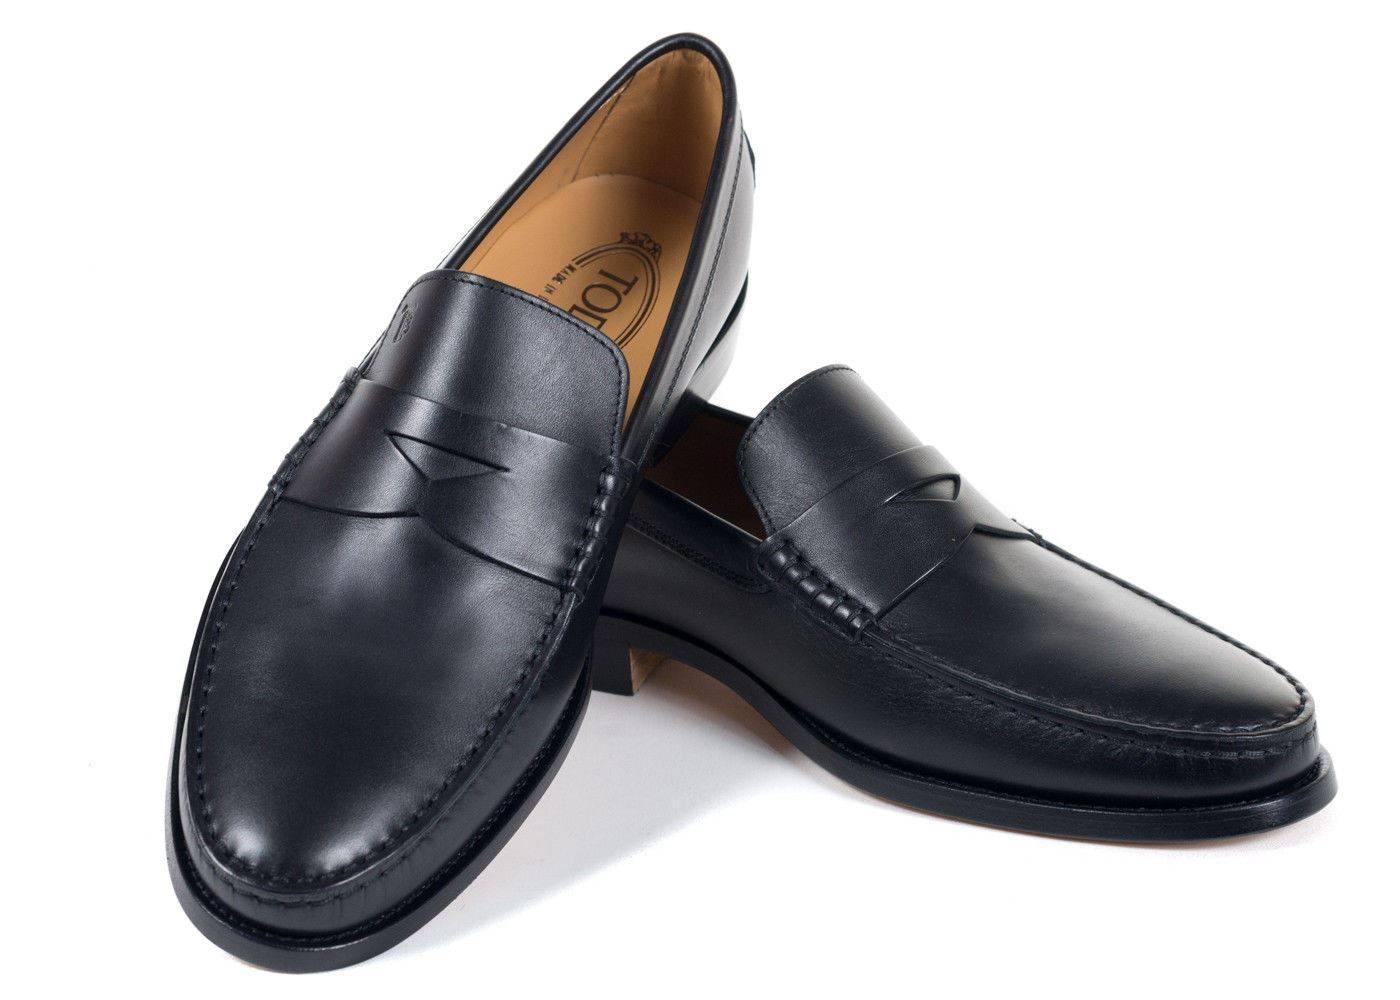 Brand New Tod's Men's Loafers
Original Box & Dust Bag Included
Retails in Stores & Online for $495
UK8 / US9 
All Shoes are in UK Sizing

Tod's classic penny loafers crafted in black calfskin leather for an ultra smooth look to these shoes. These